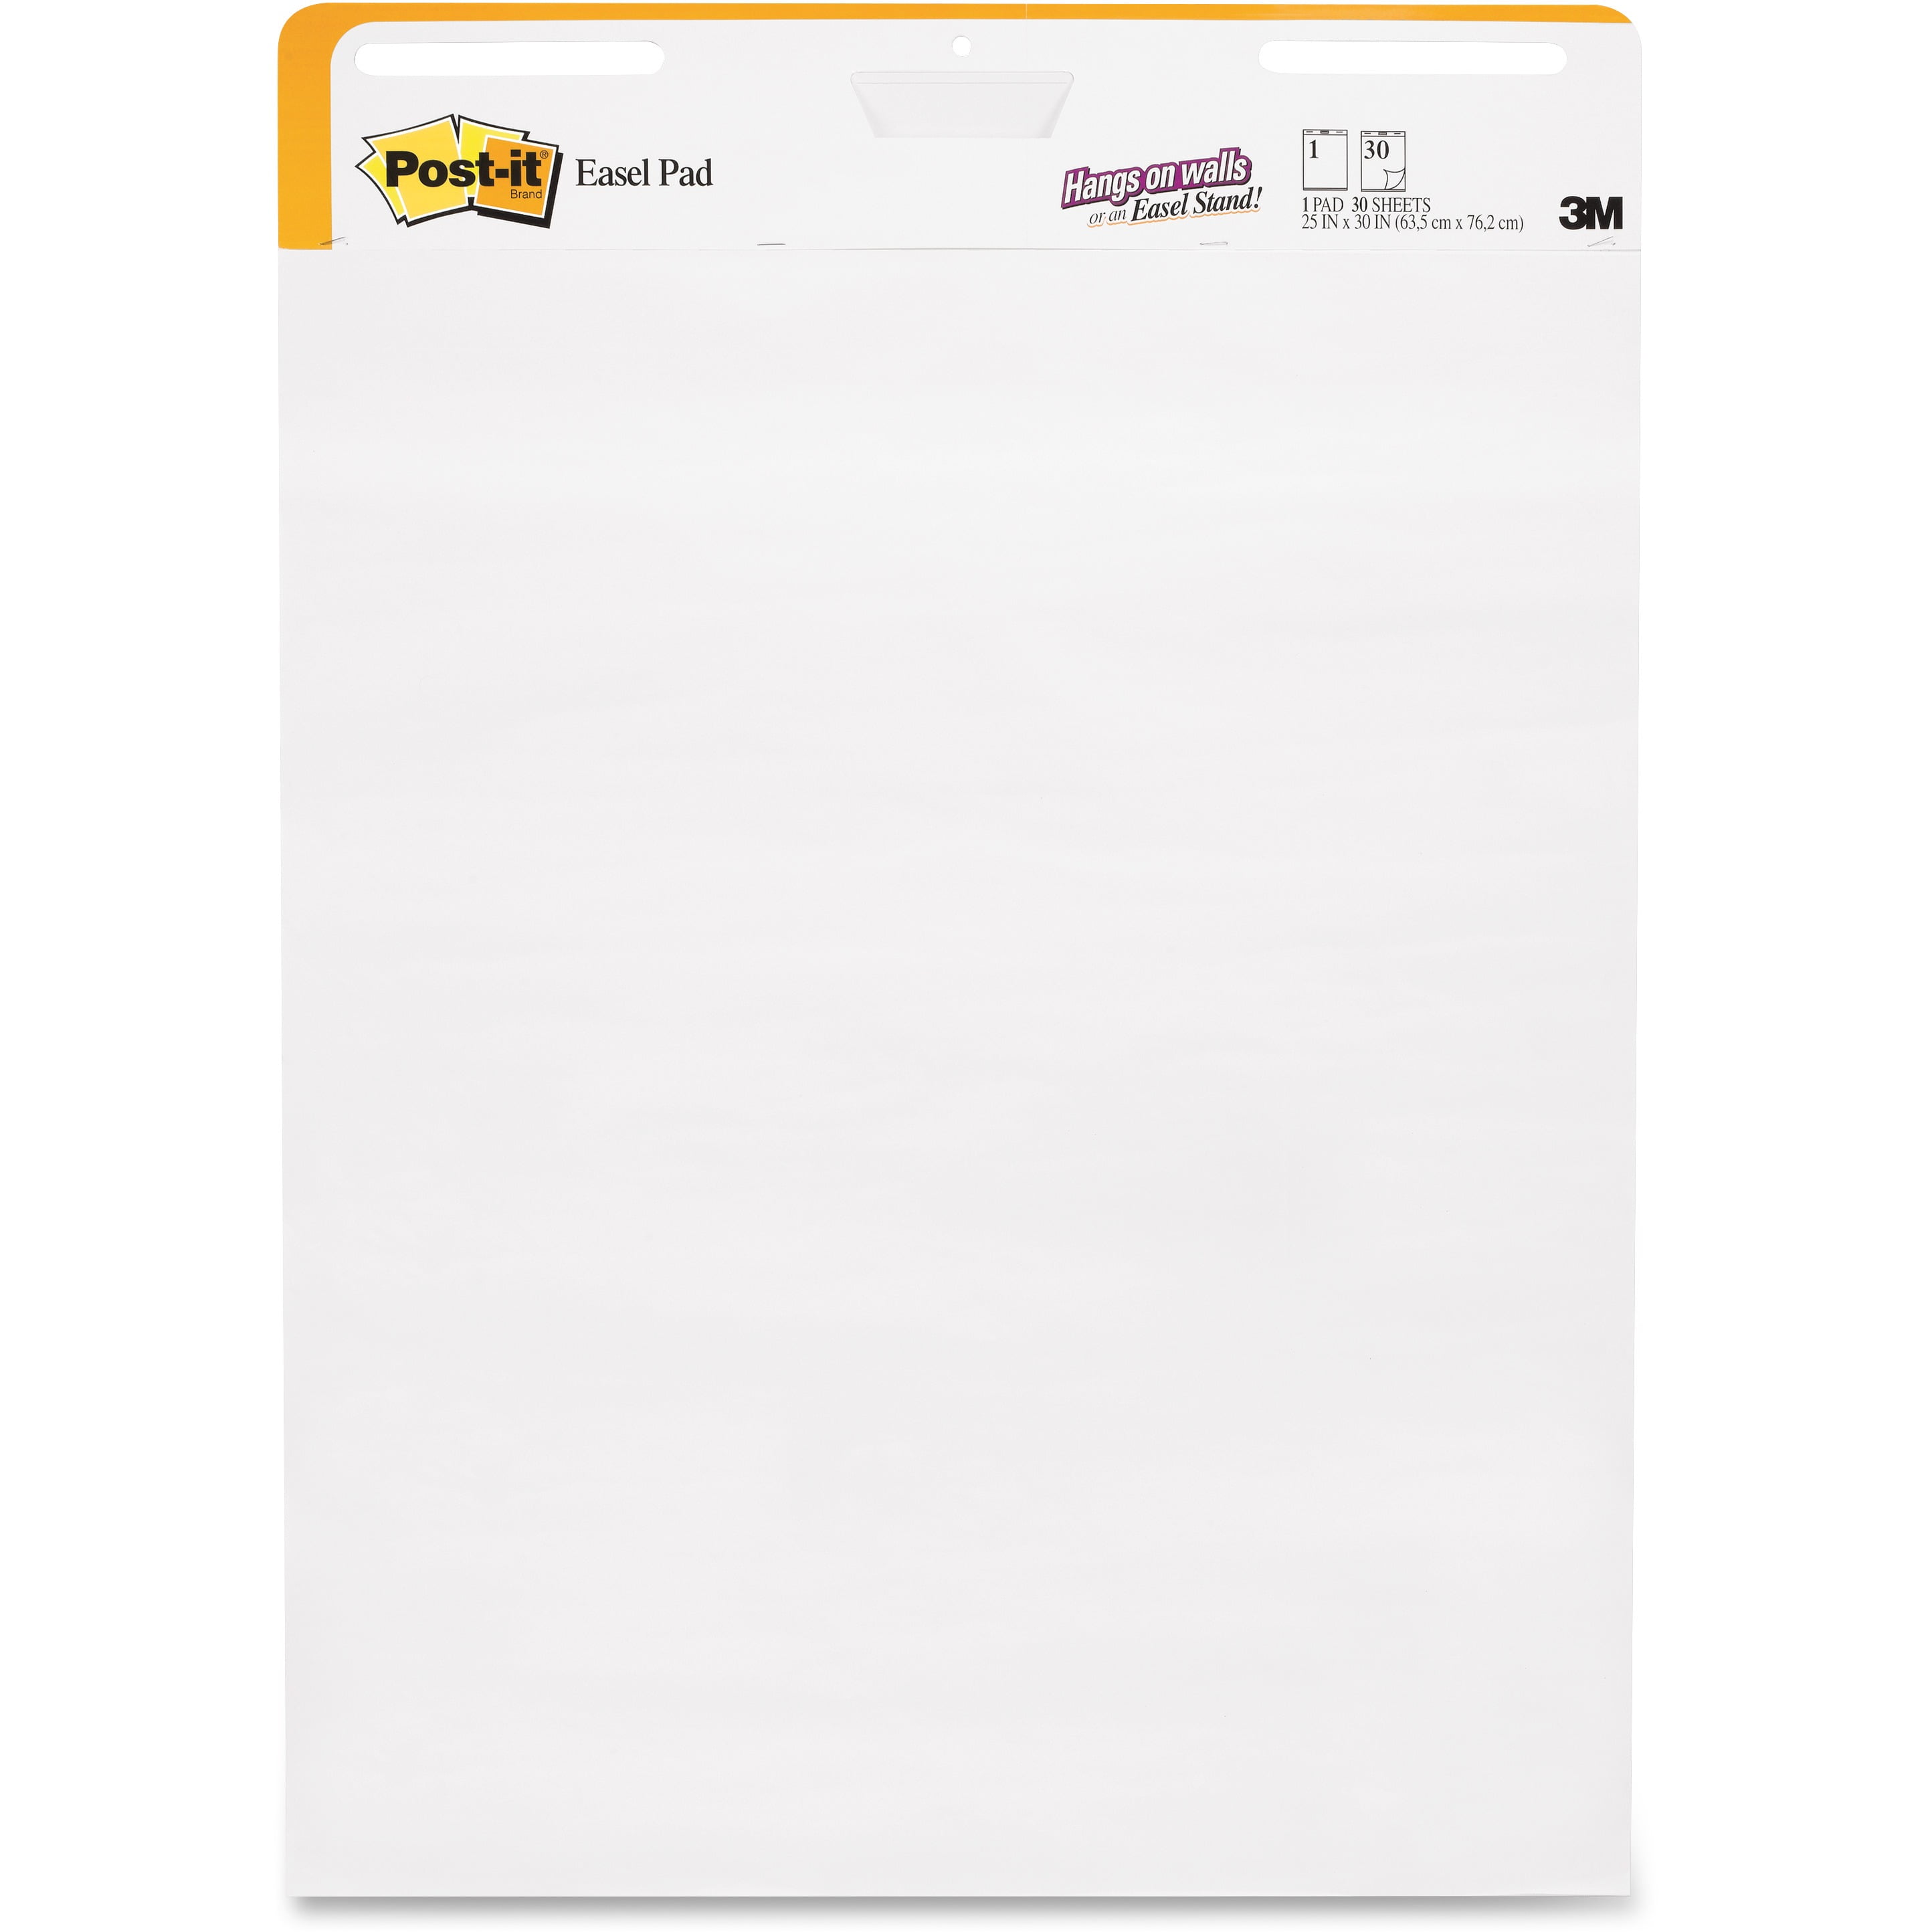 Details about   POST-IT SELF-STICK EASEL PADS 2/PK WHITE 